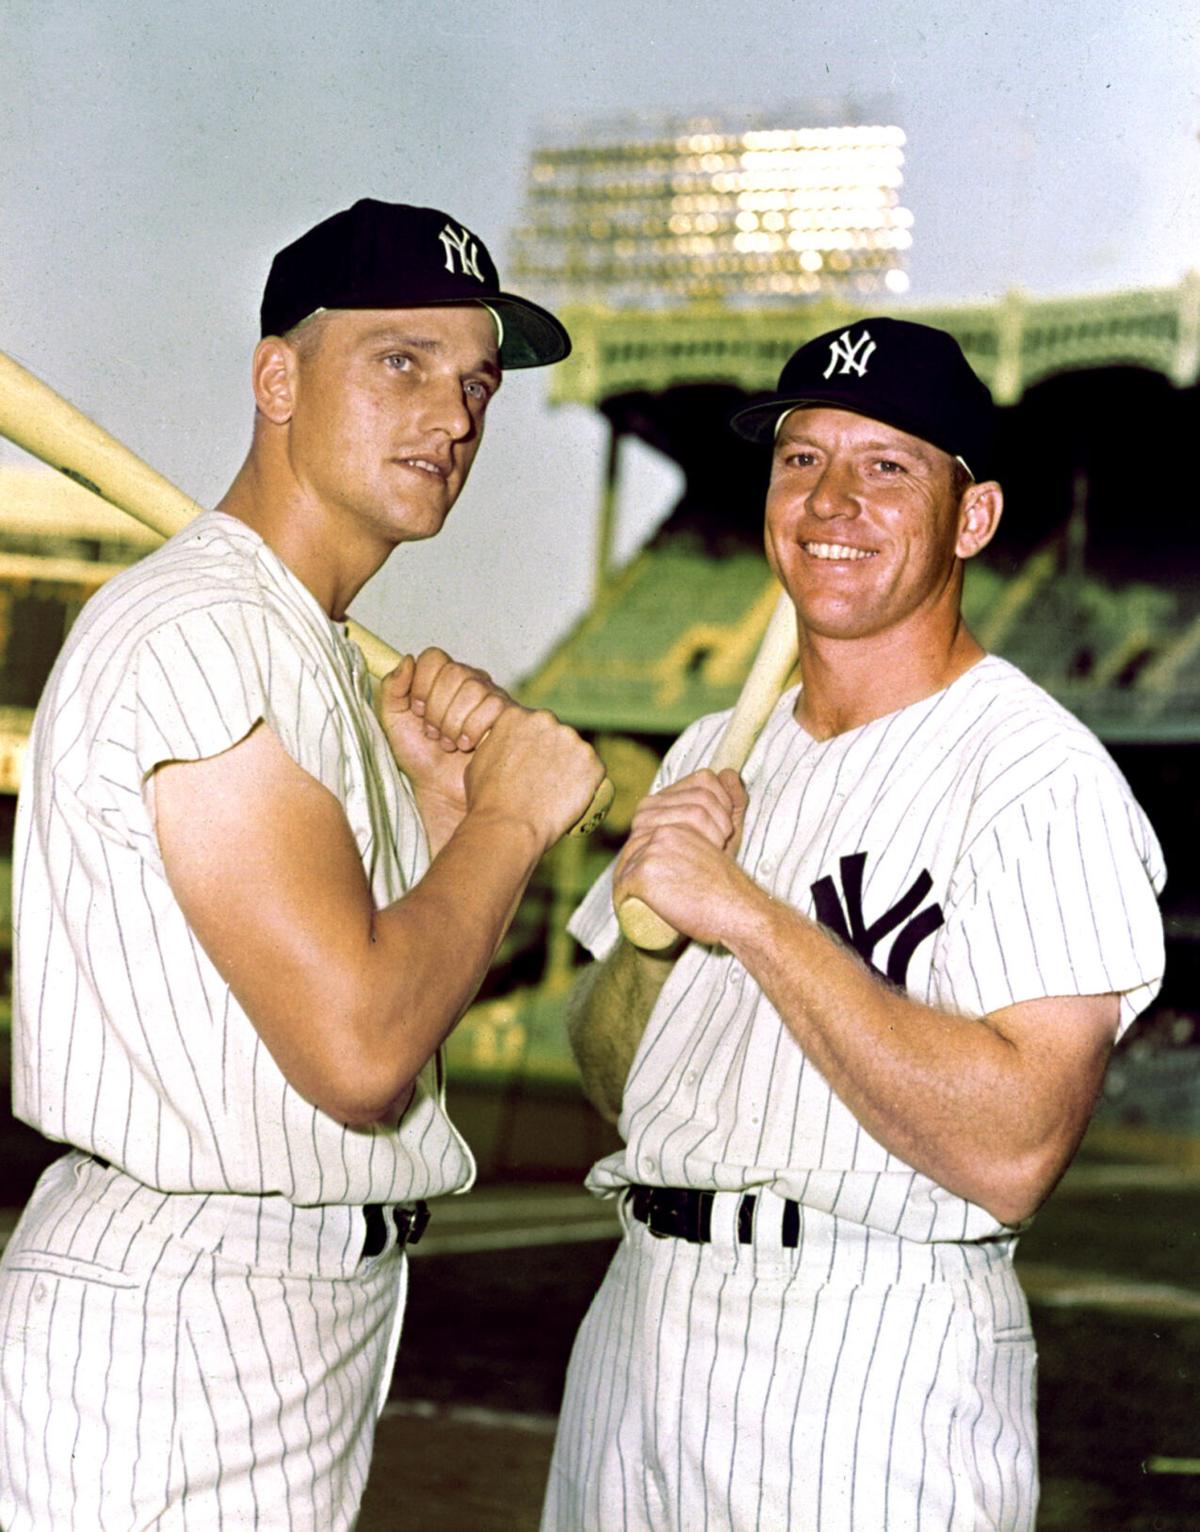 Roger Maris poses with Mickey Mantle in their NY Yankee's uniforms